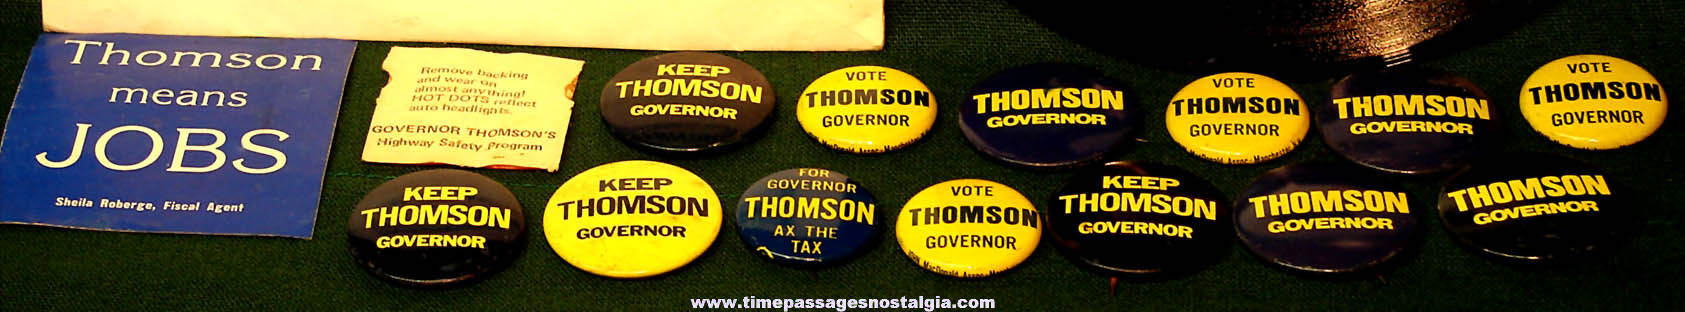 (16) 1970s New Hampshire Governor Mel Thomson Political Campaign Advertising Items